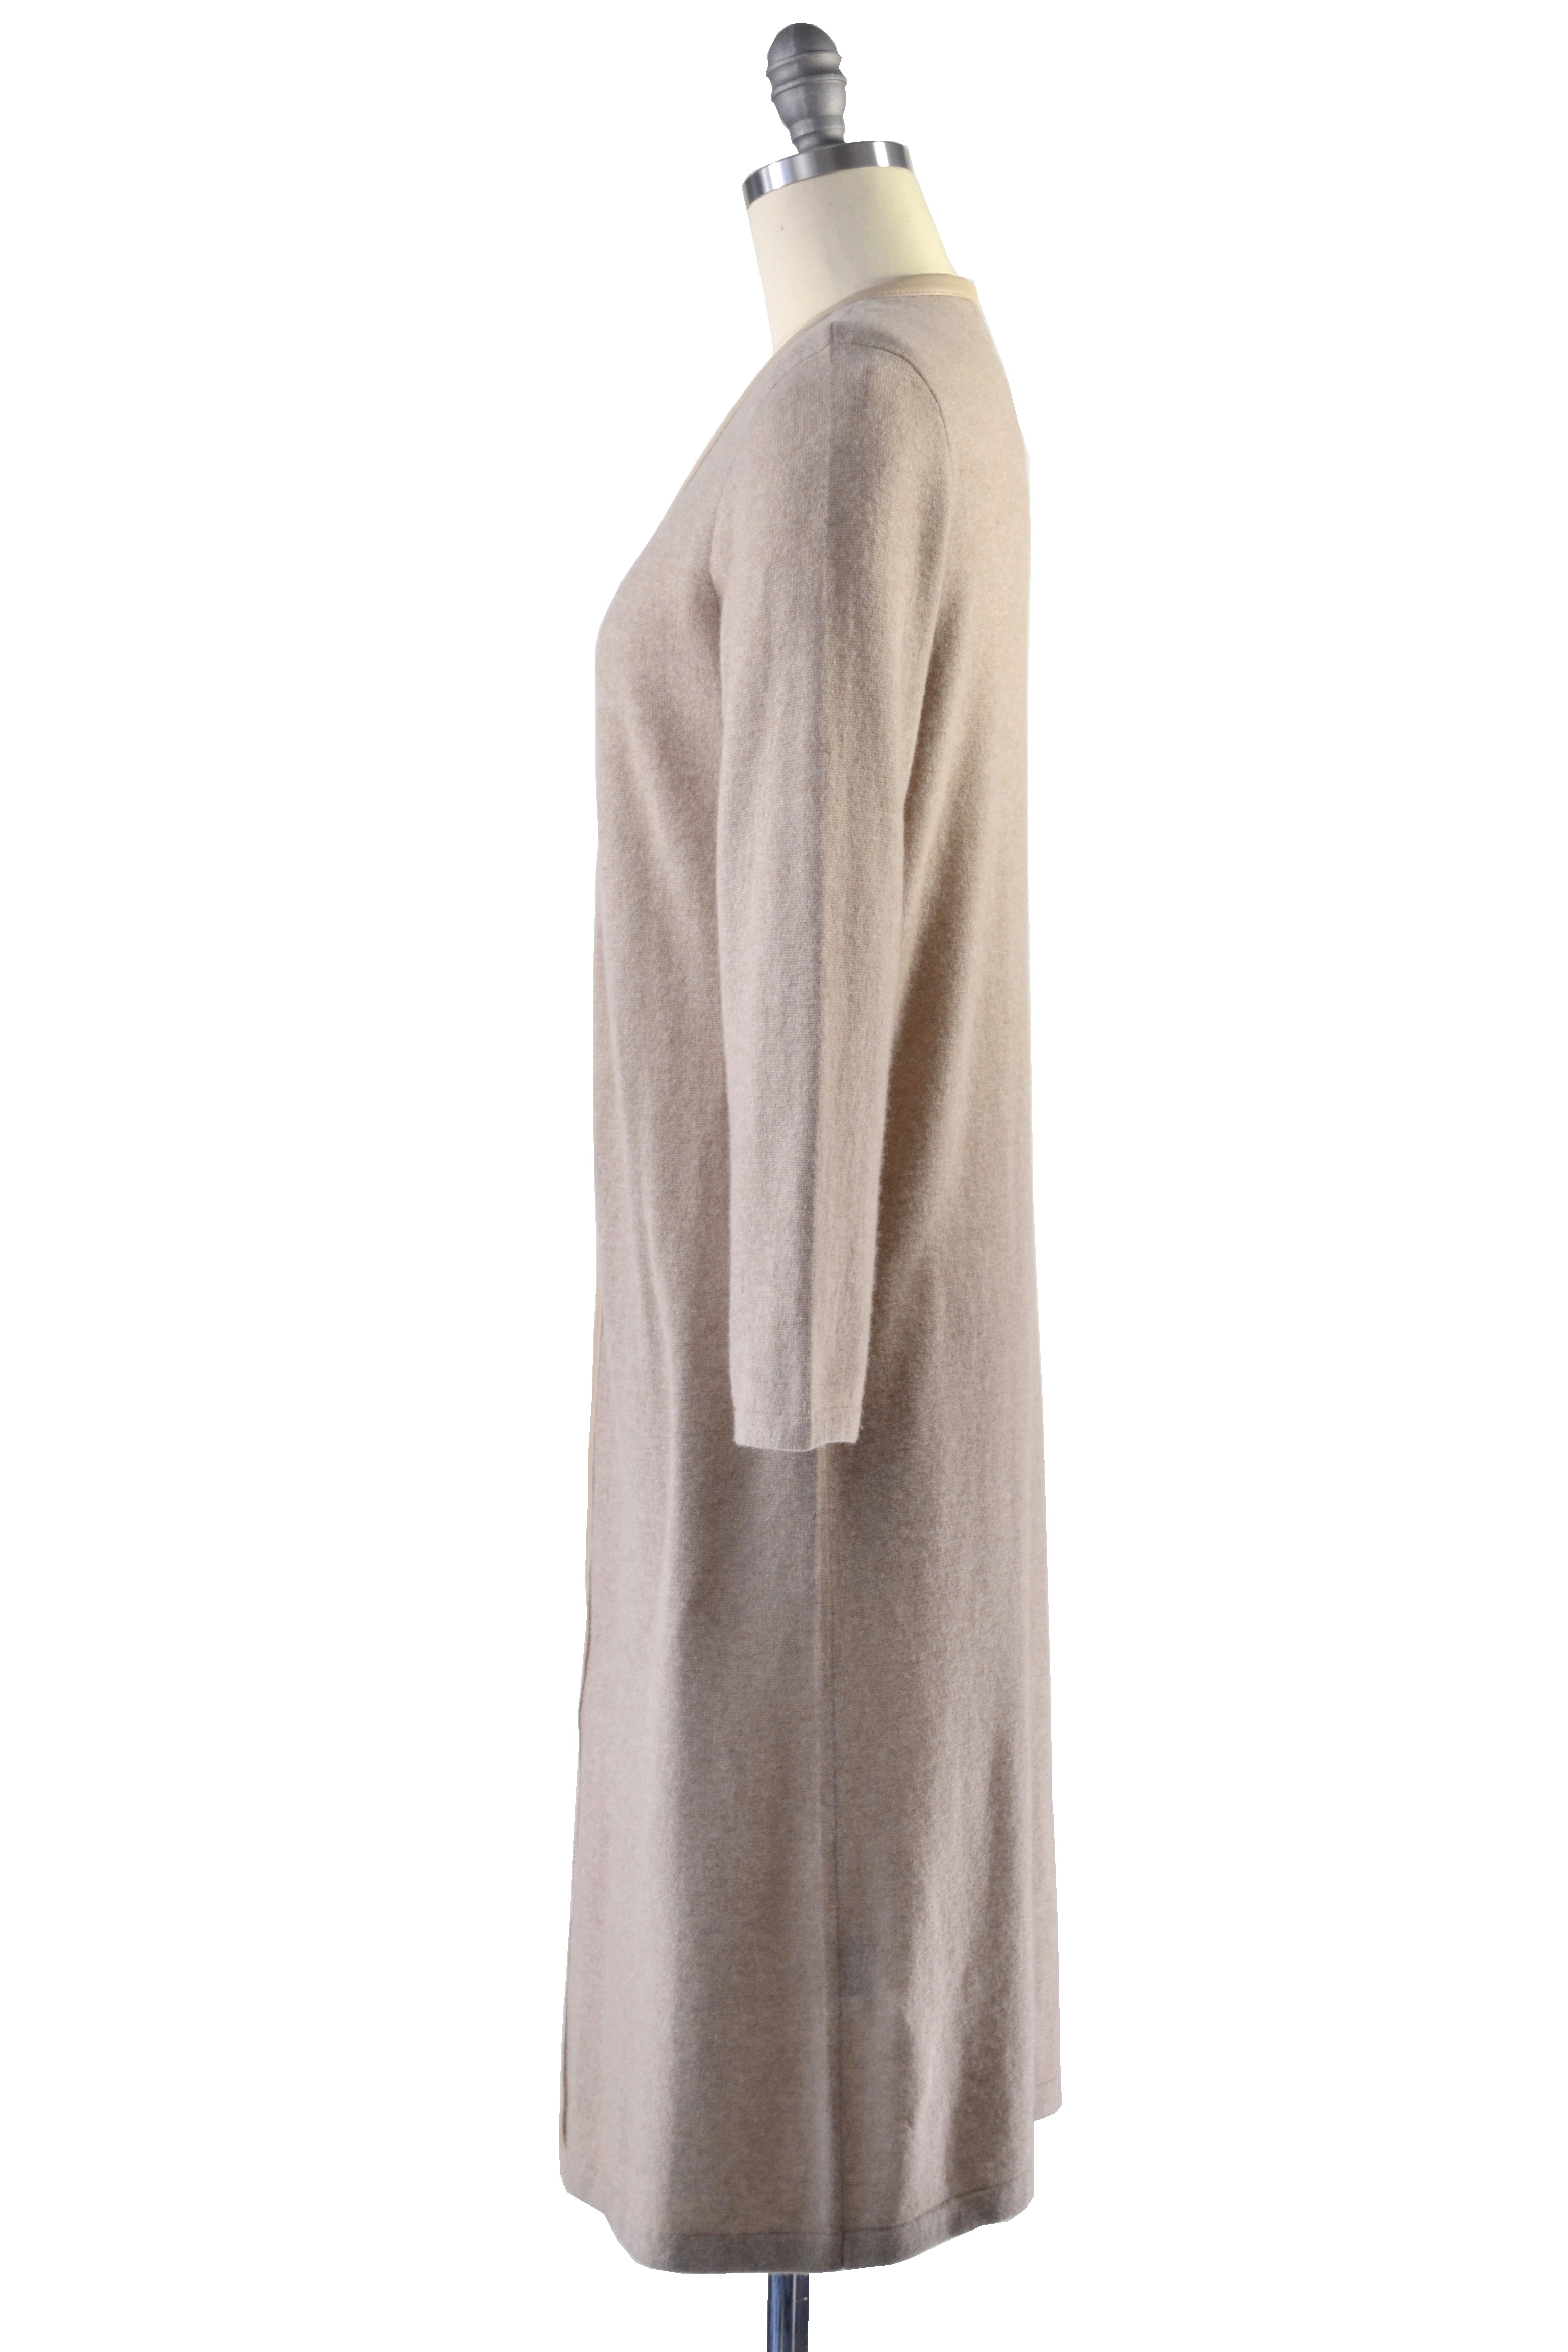 Cashmere Duster with Leather Trim in Safari